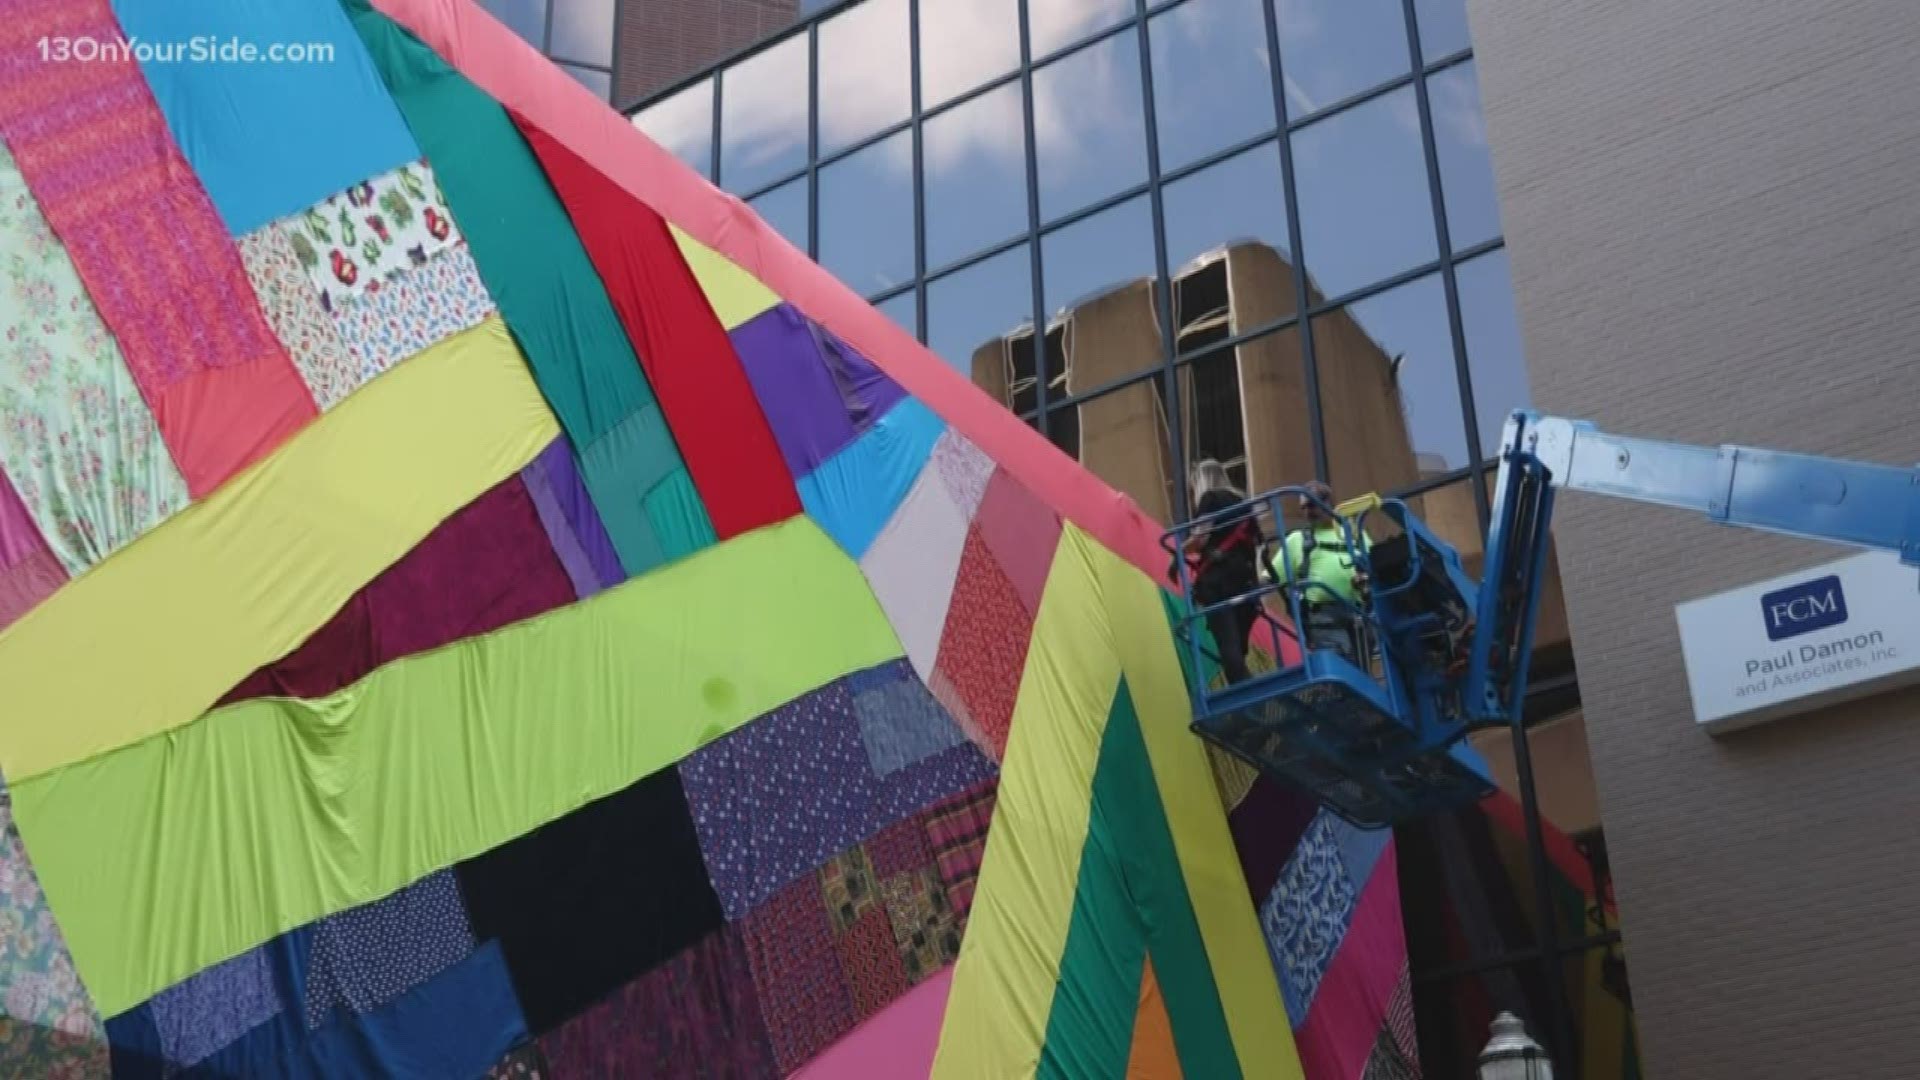 The project has something for everyone like ArtPrize, but it's organized a little differently.